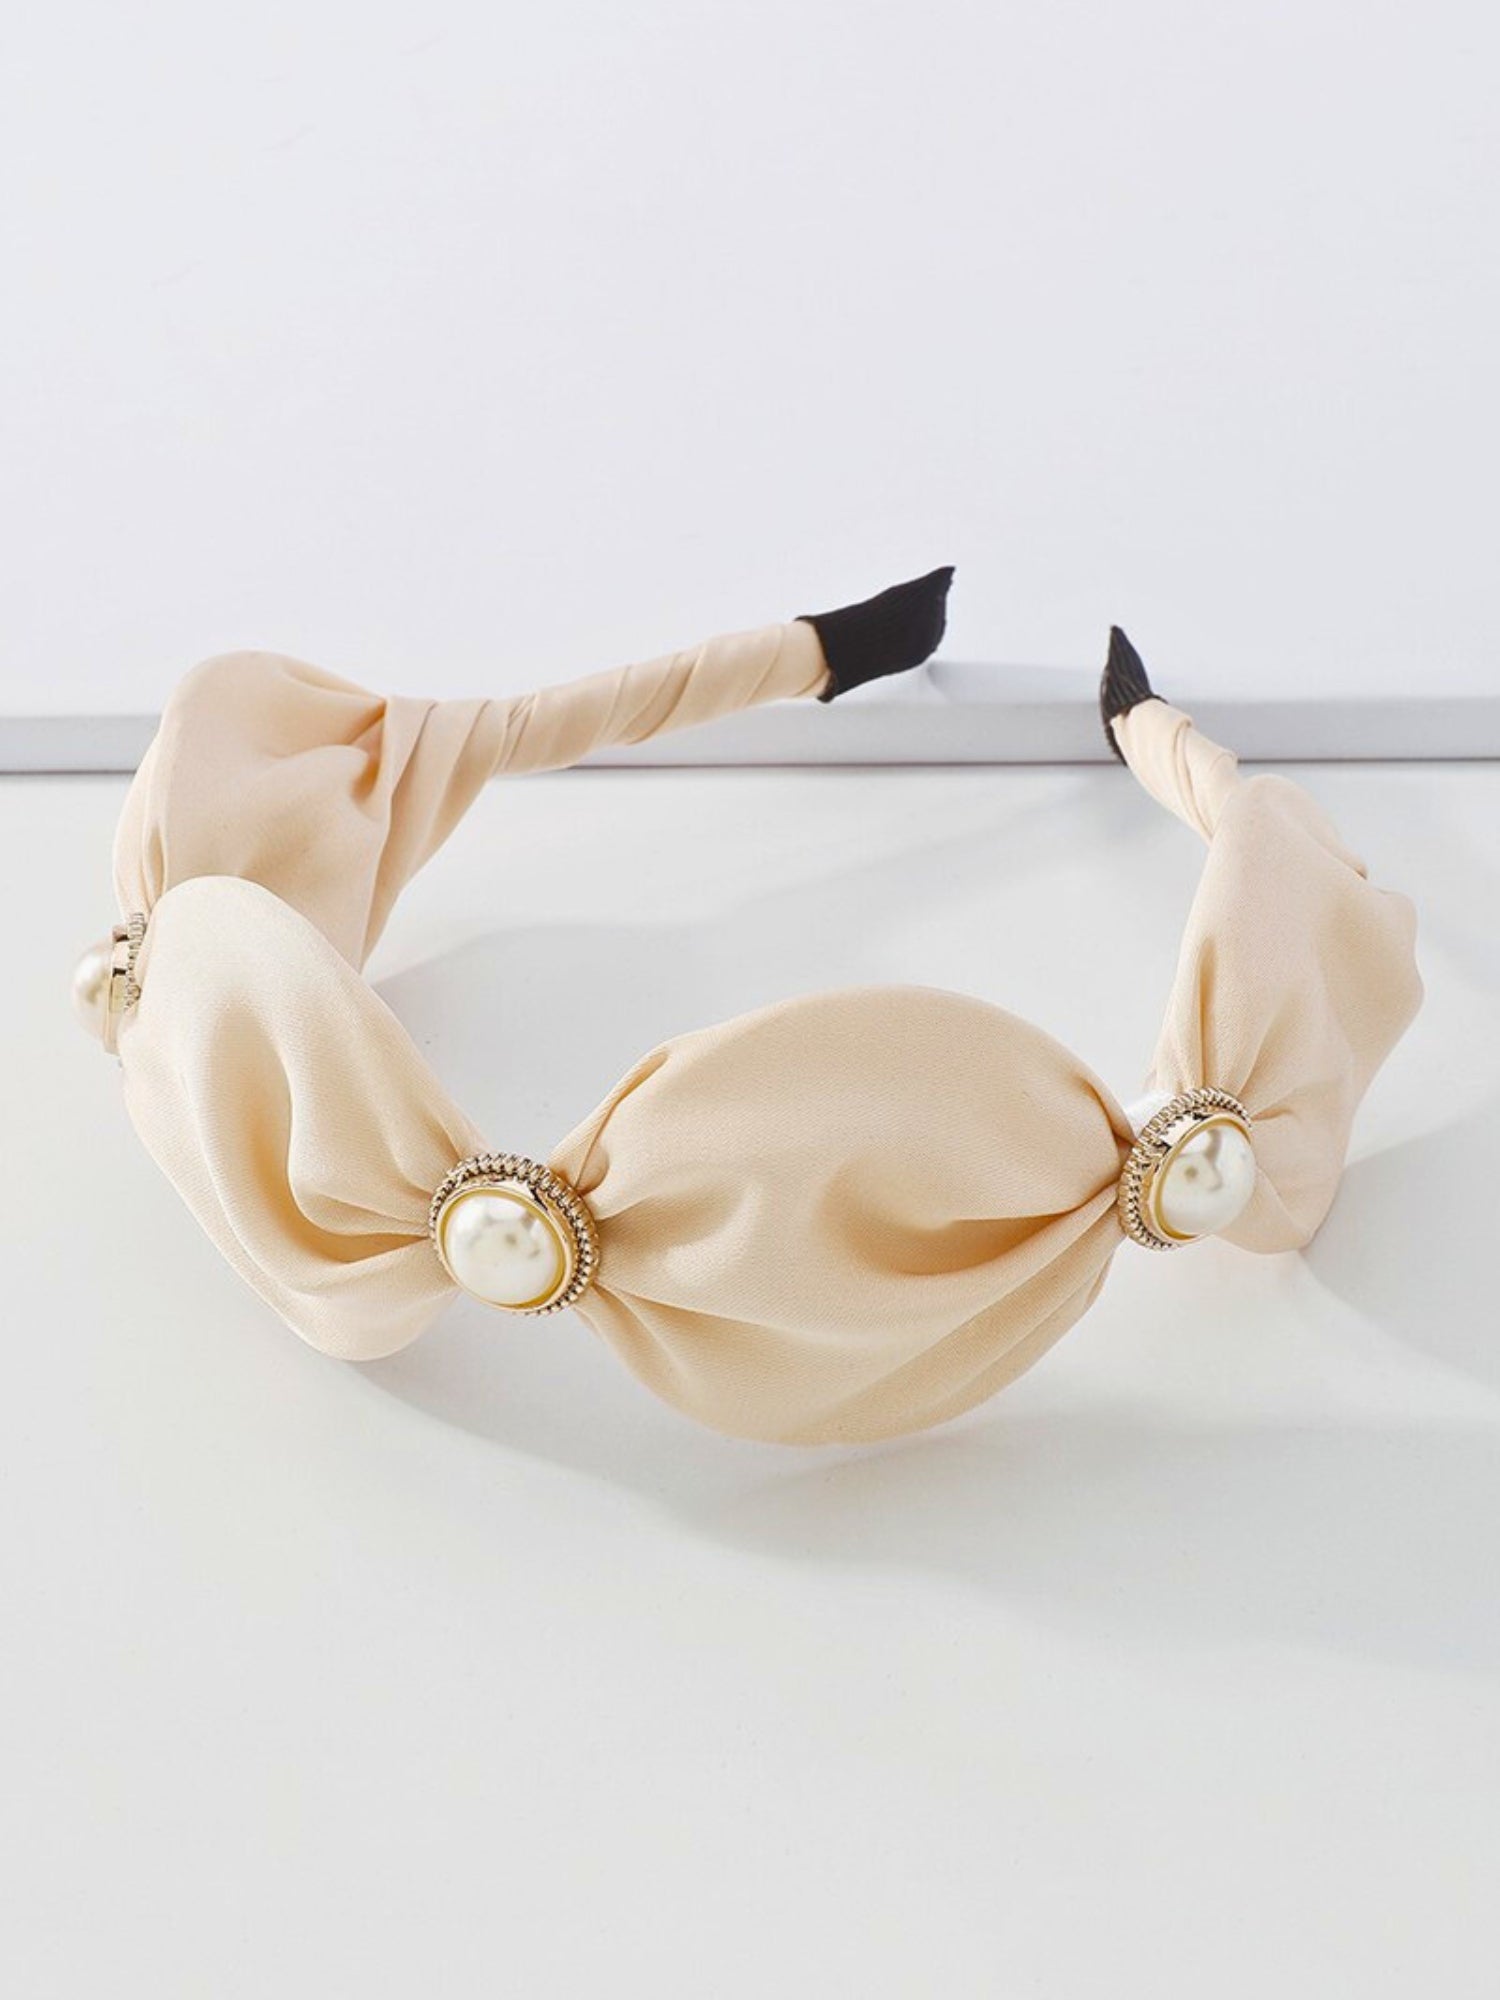 The Adorned Pearl Headband - Simple yet elevated, The Adorned Pearl Headband is a subtle way to complete your chicest ensemble, made of soft ivory fabric that is bunched and adorned with the sweetest pearl embellishment. Size: 6.1" x 4.72" Wider Coverage: